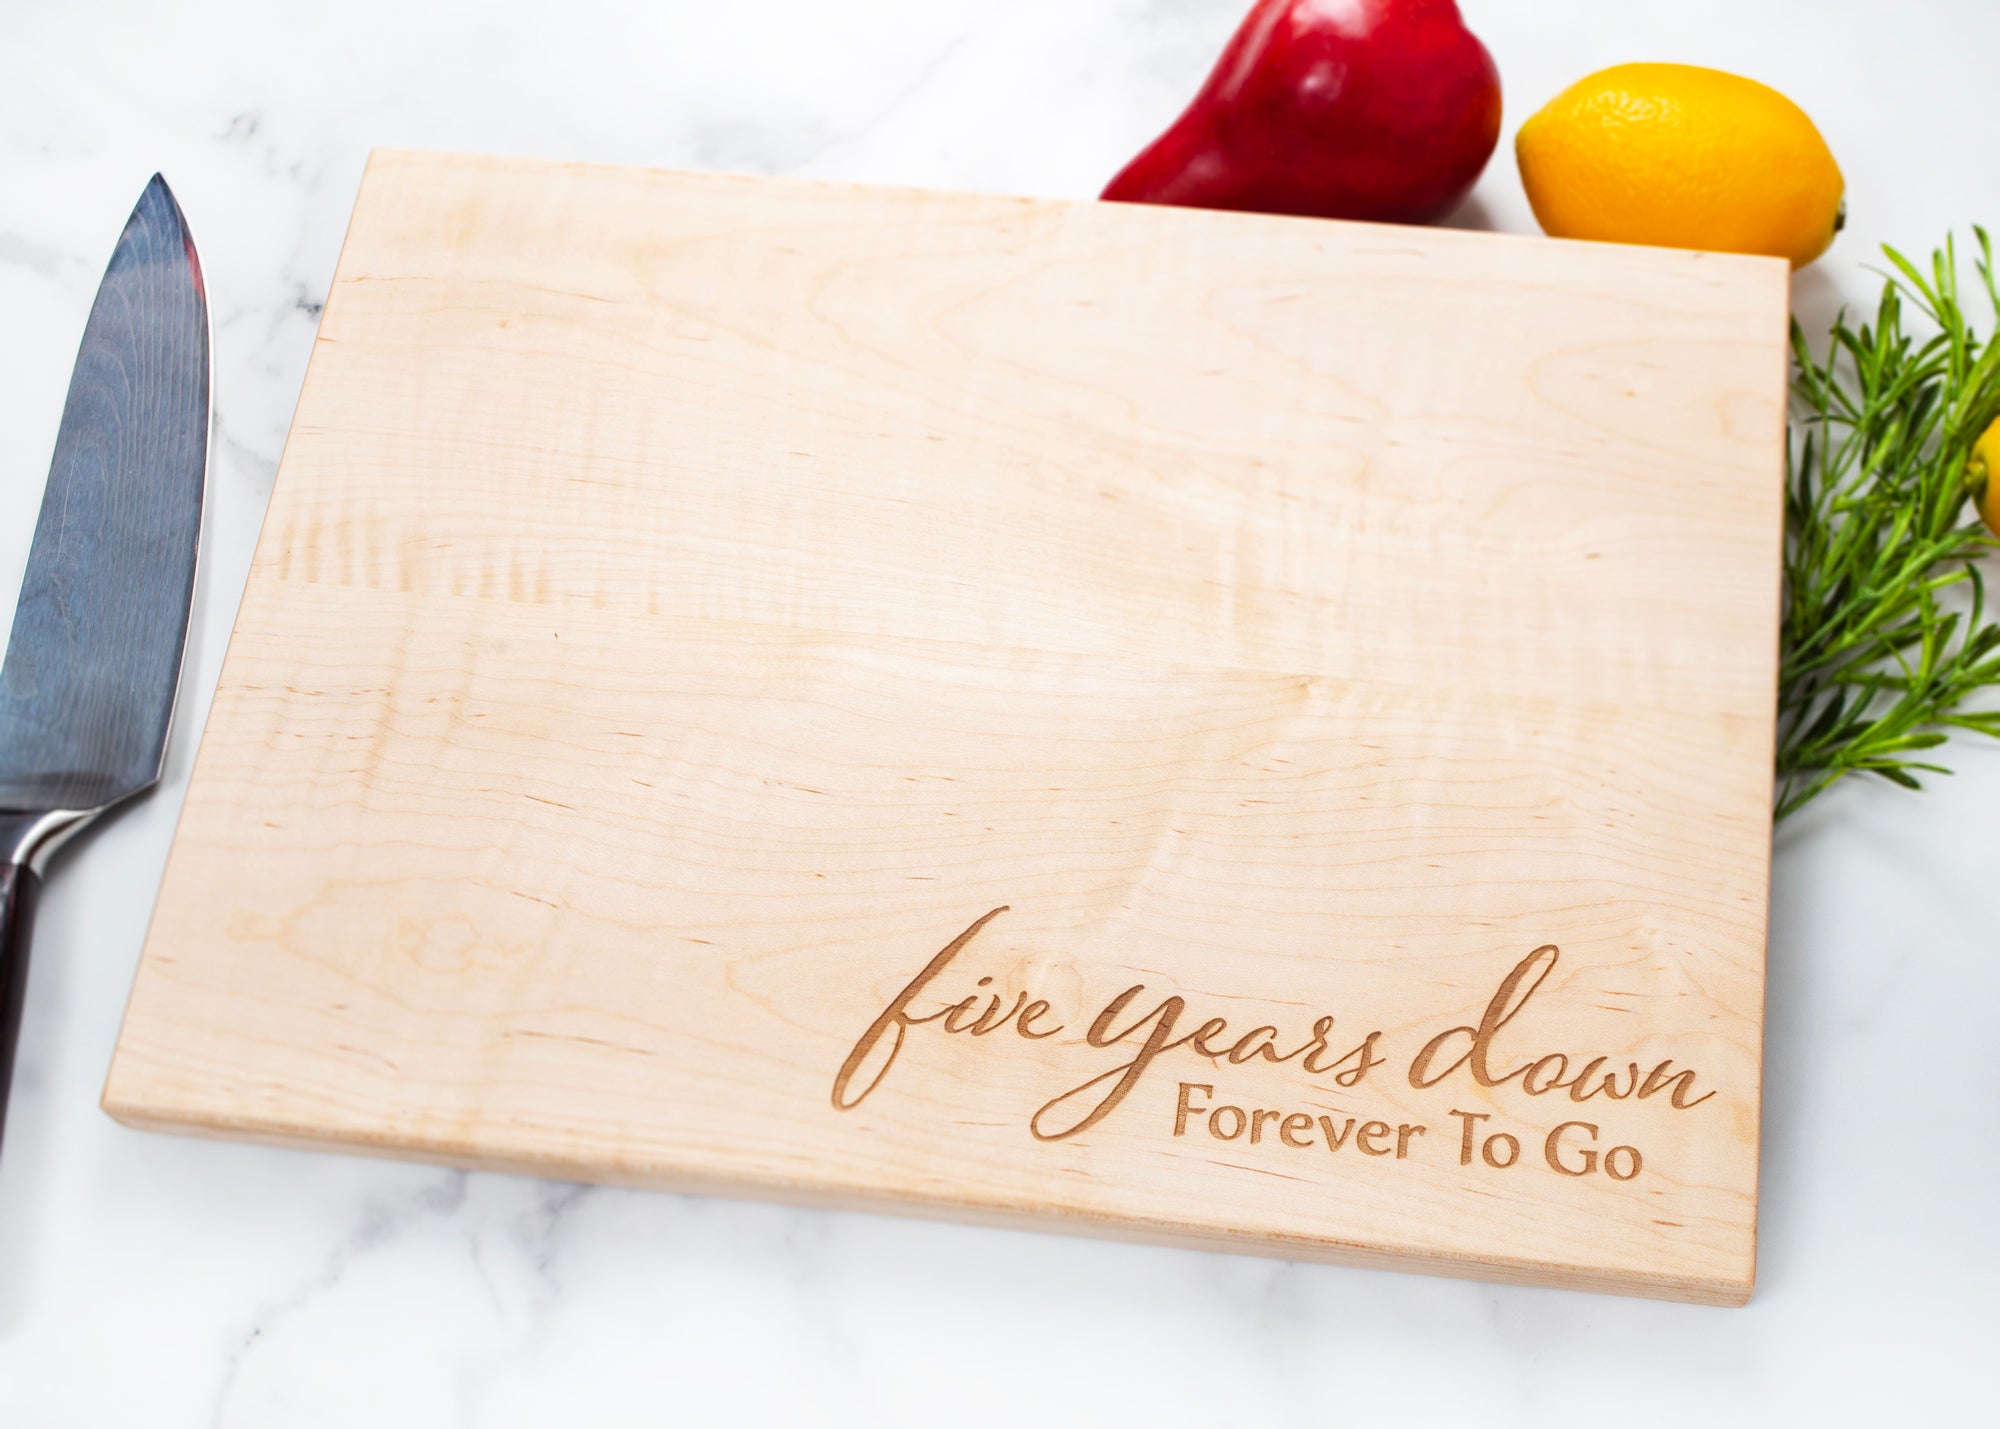 This 5th anniversary personalized cutting board is the perfect wedding, housewarming, or anniversary gift for a couple. Crafted from high-quality wood, the board is sure to last through countless meals and celebrations. It can be personalized with both of their names for an extra special touch. Make their special day even more memorable with this beautiful and meaningful gift